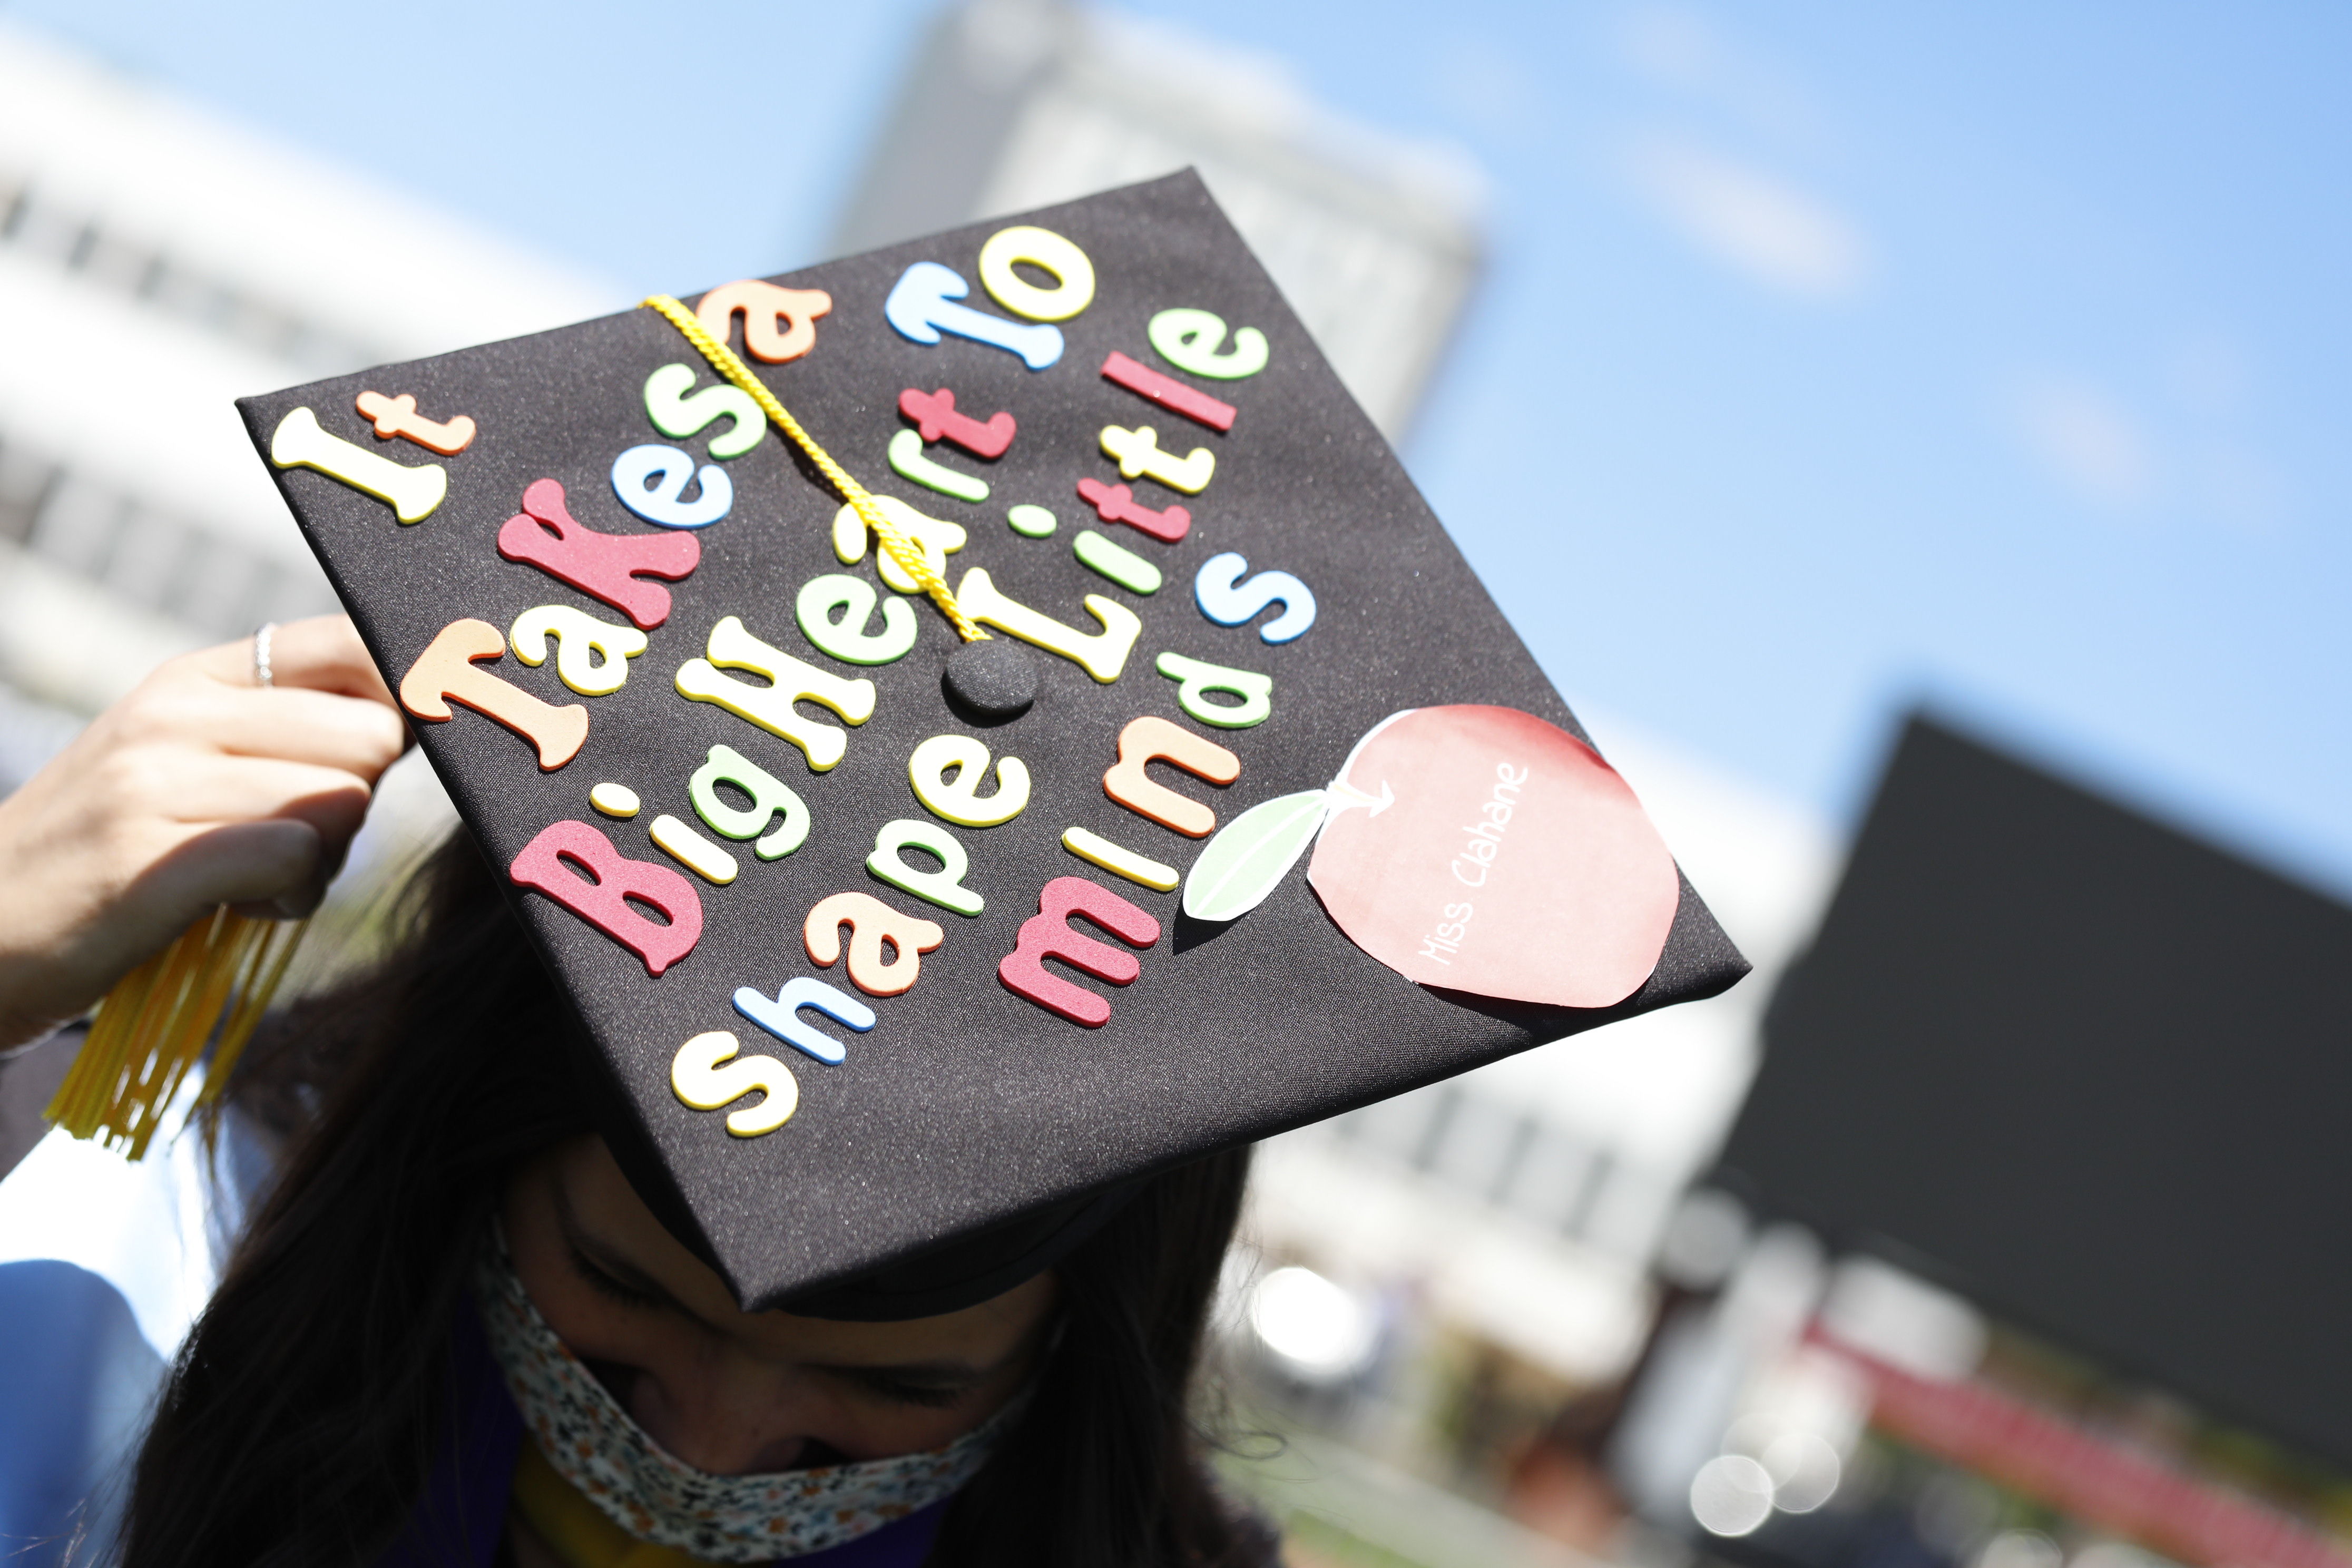 graduation cap with text "it takes a big heart to shape little minds"